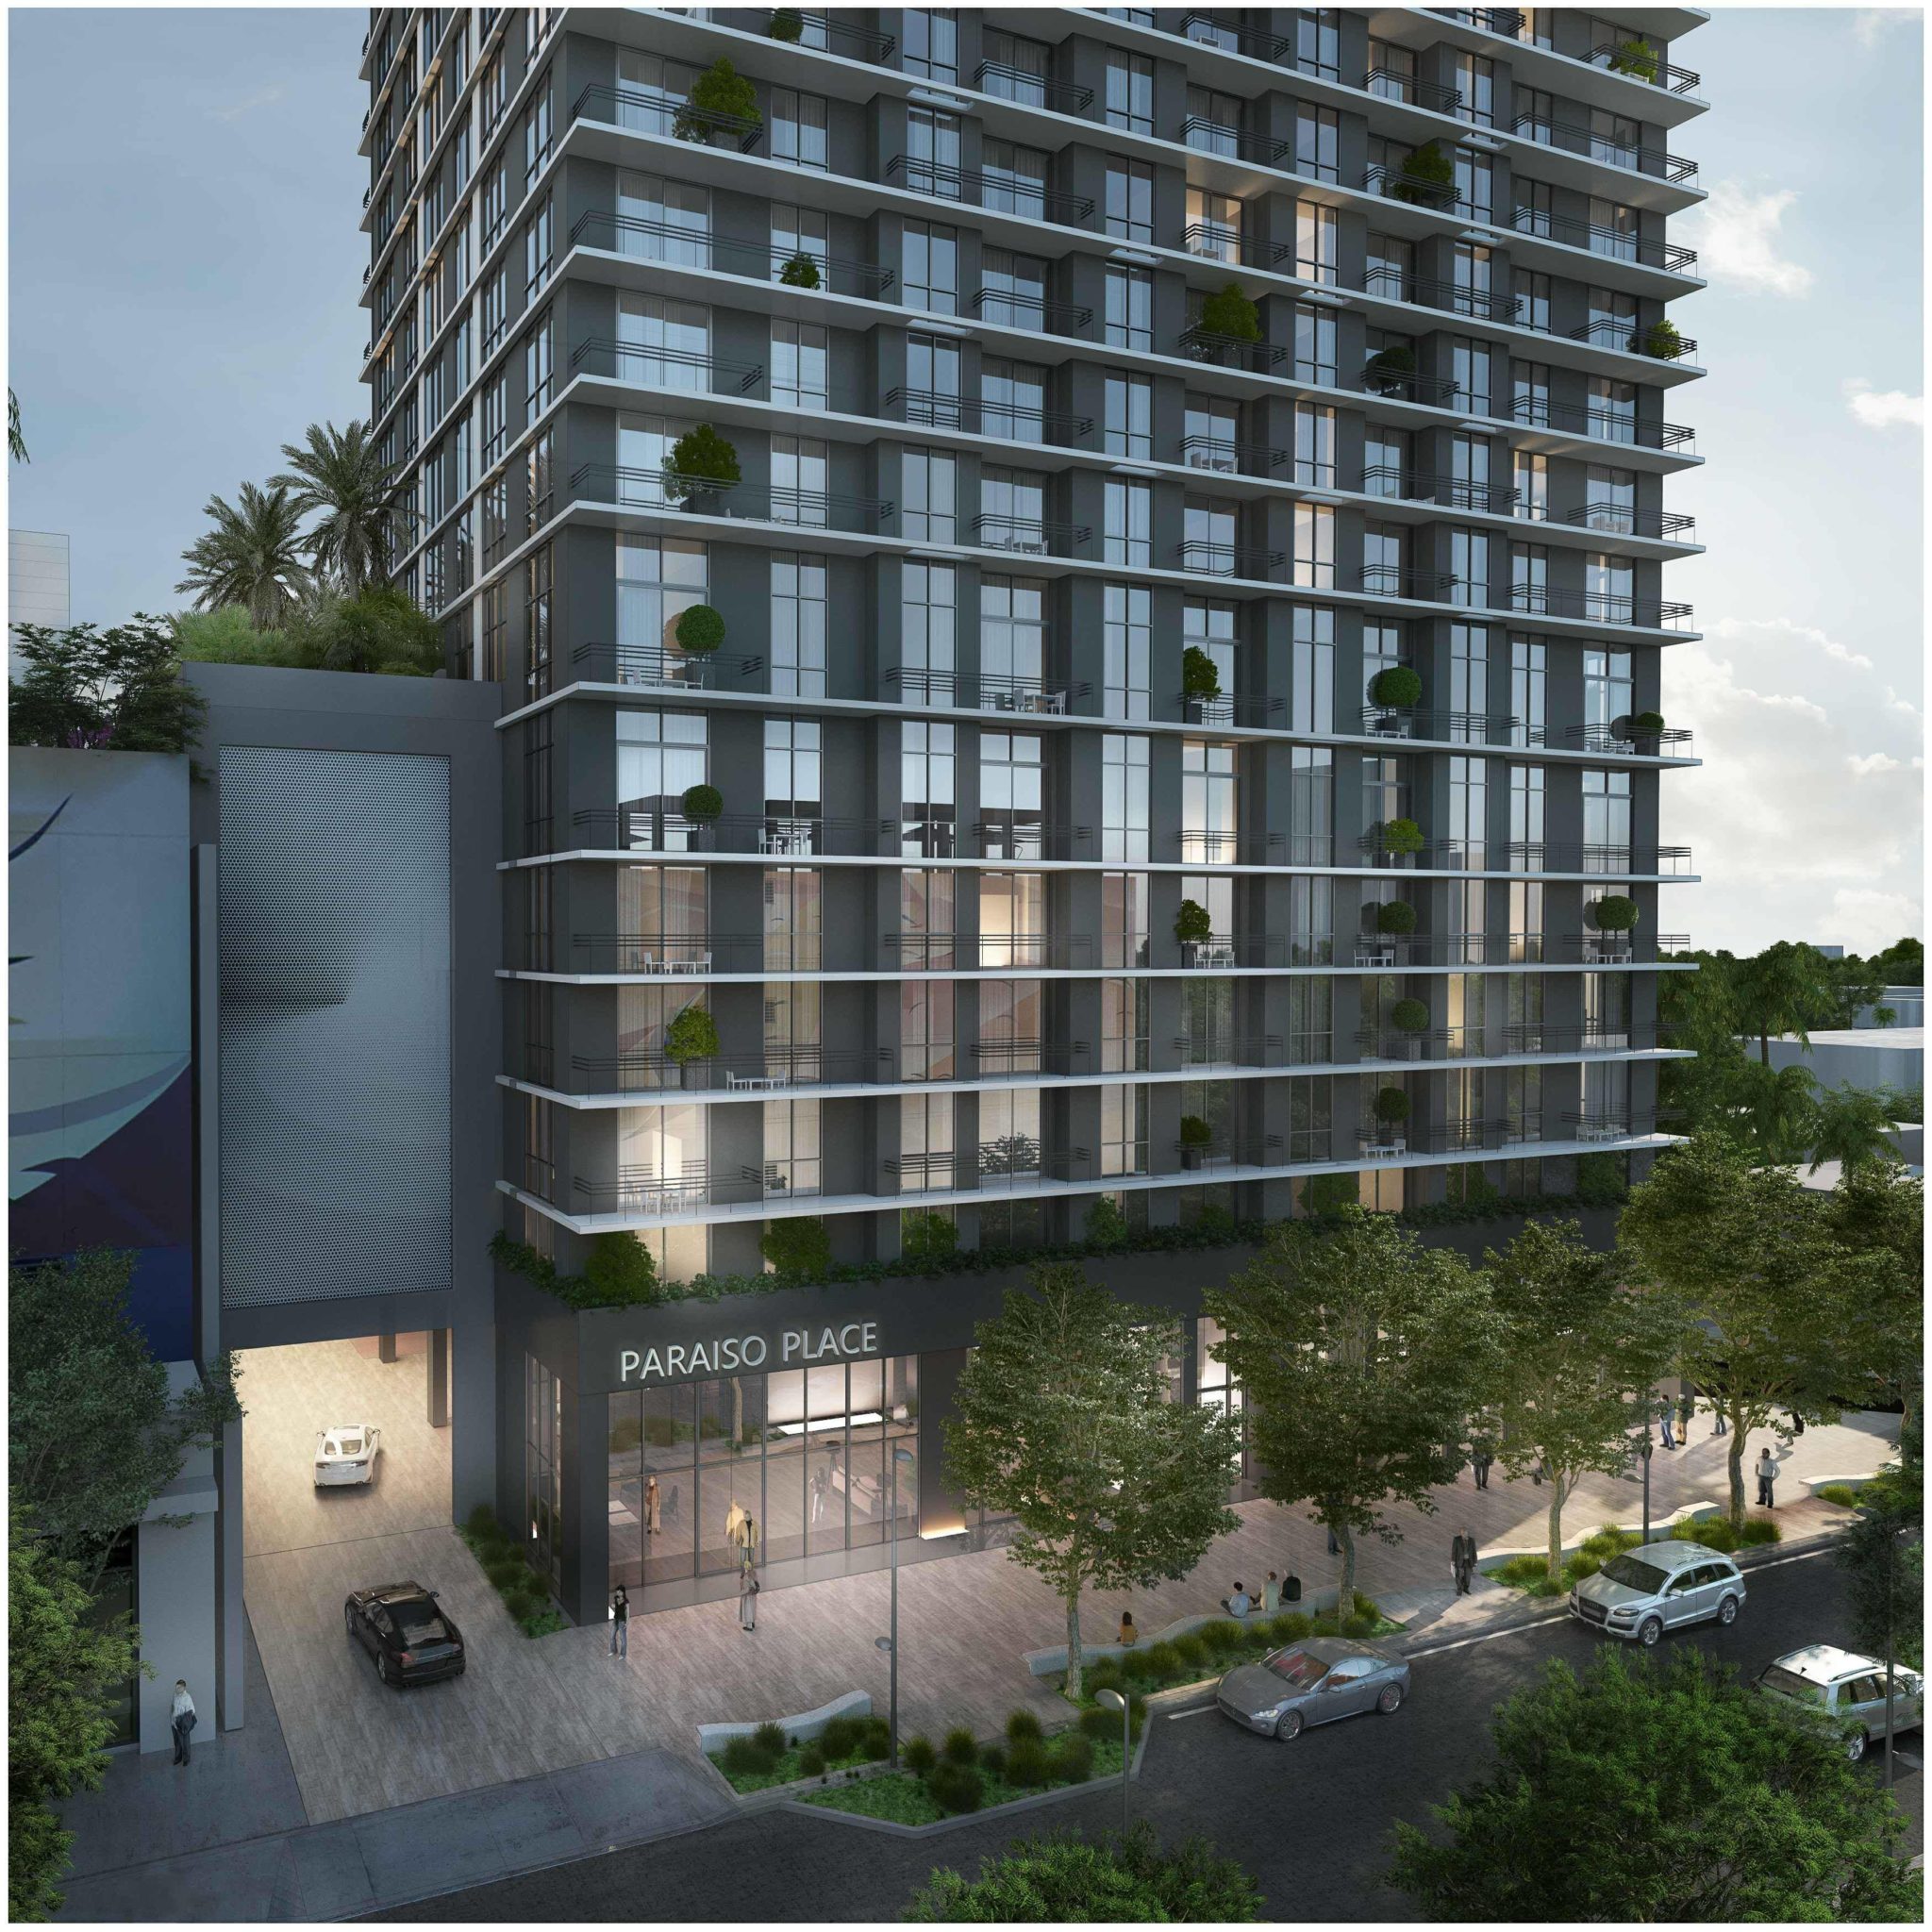 Revealed: 32-Story Paraiso Place is Planned to Edgewater